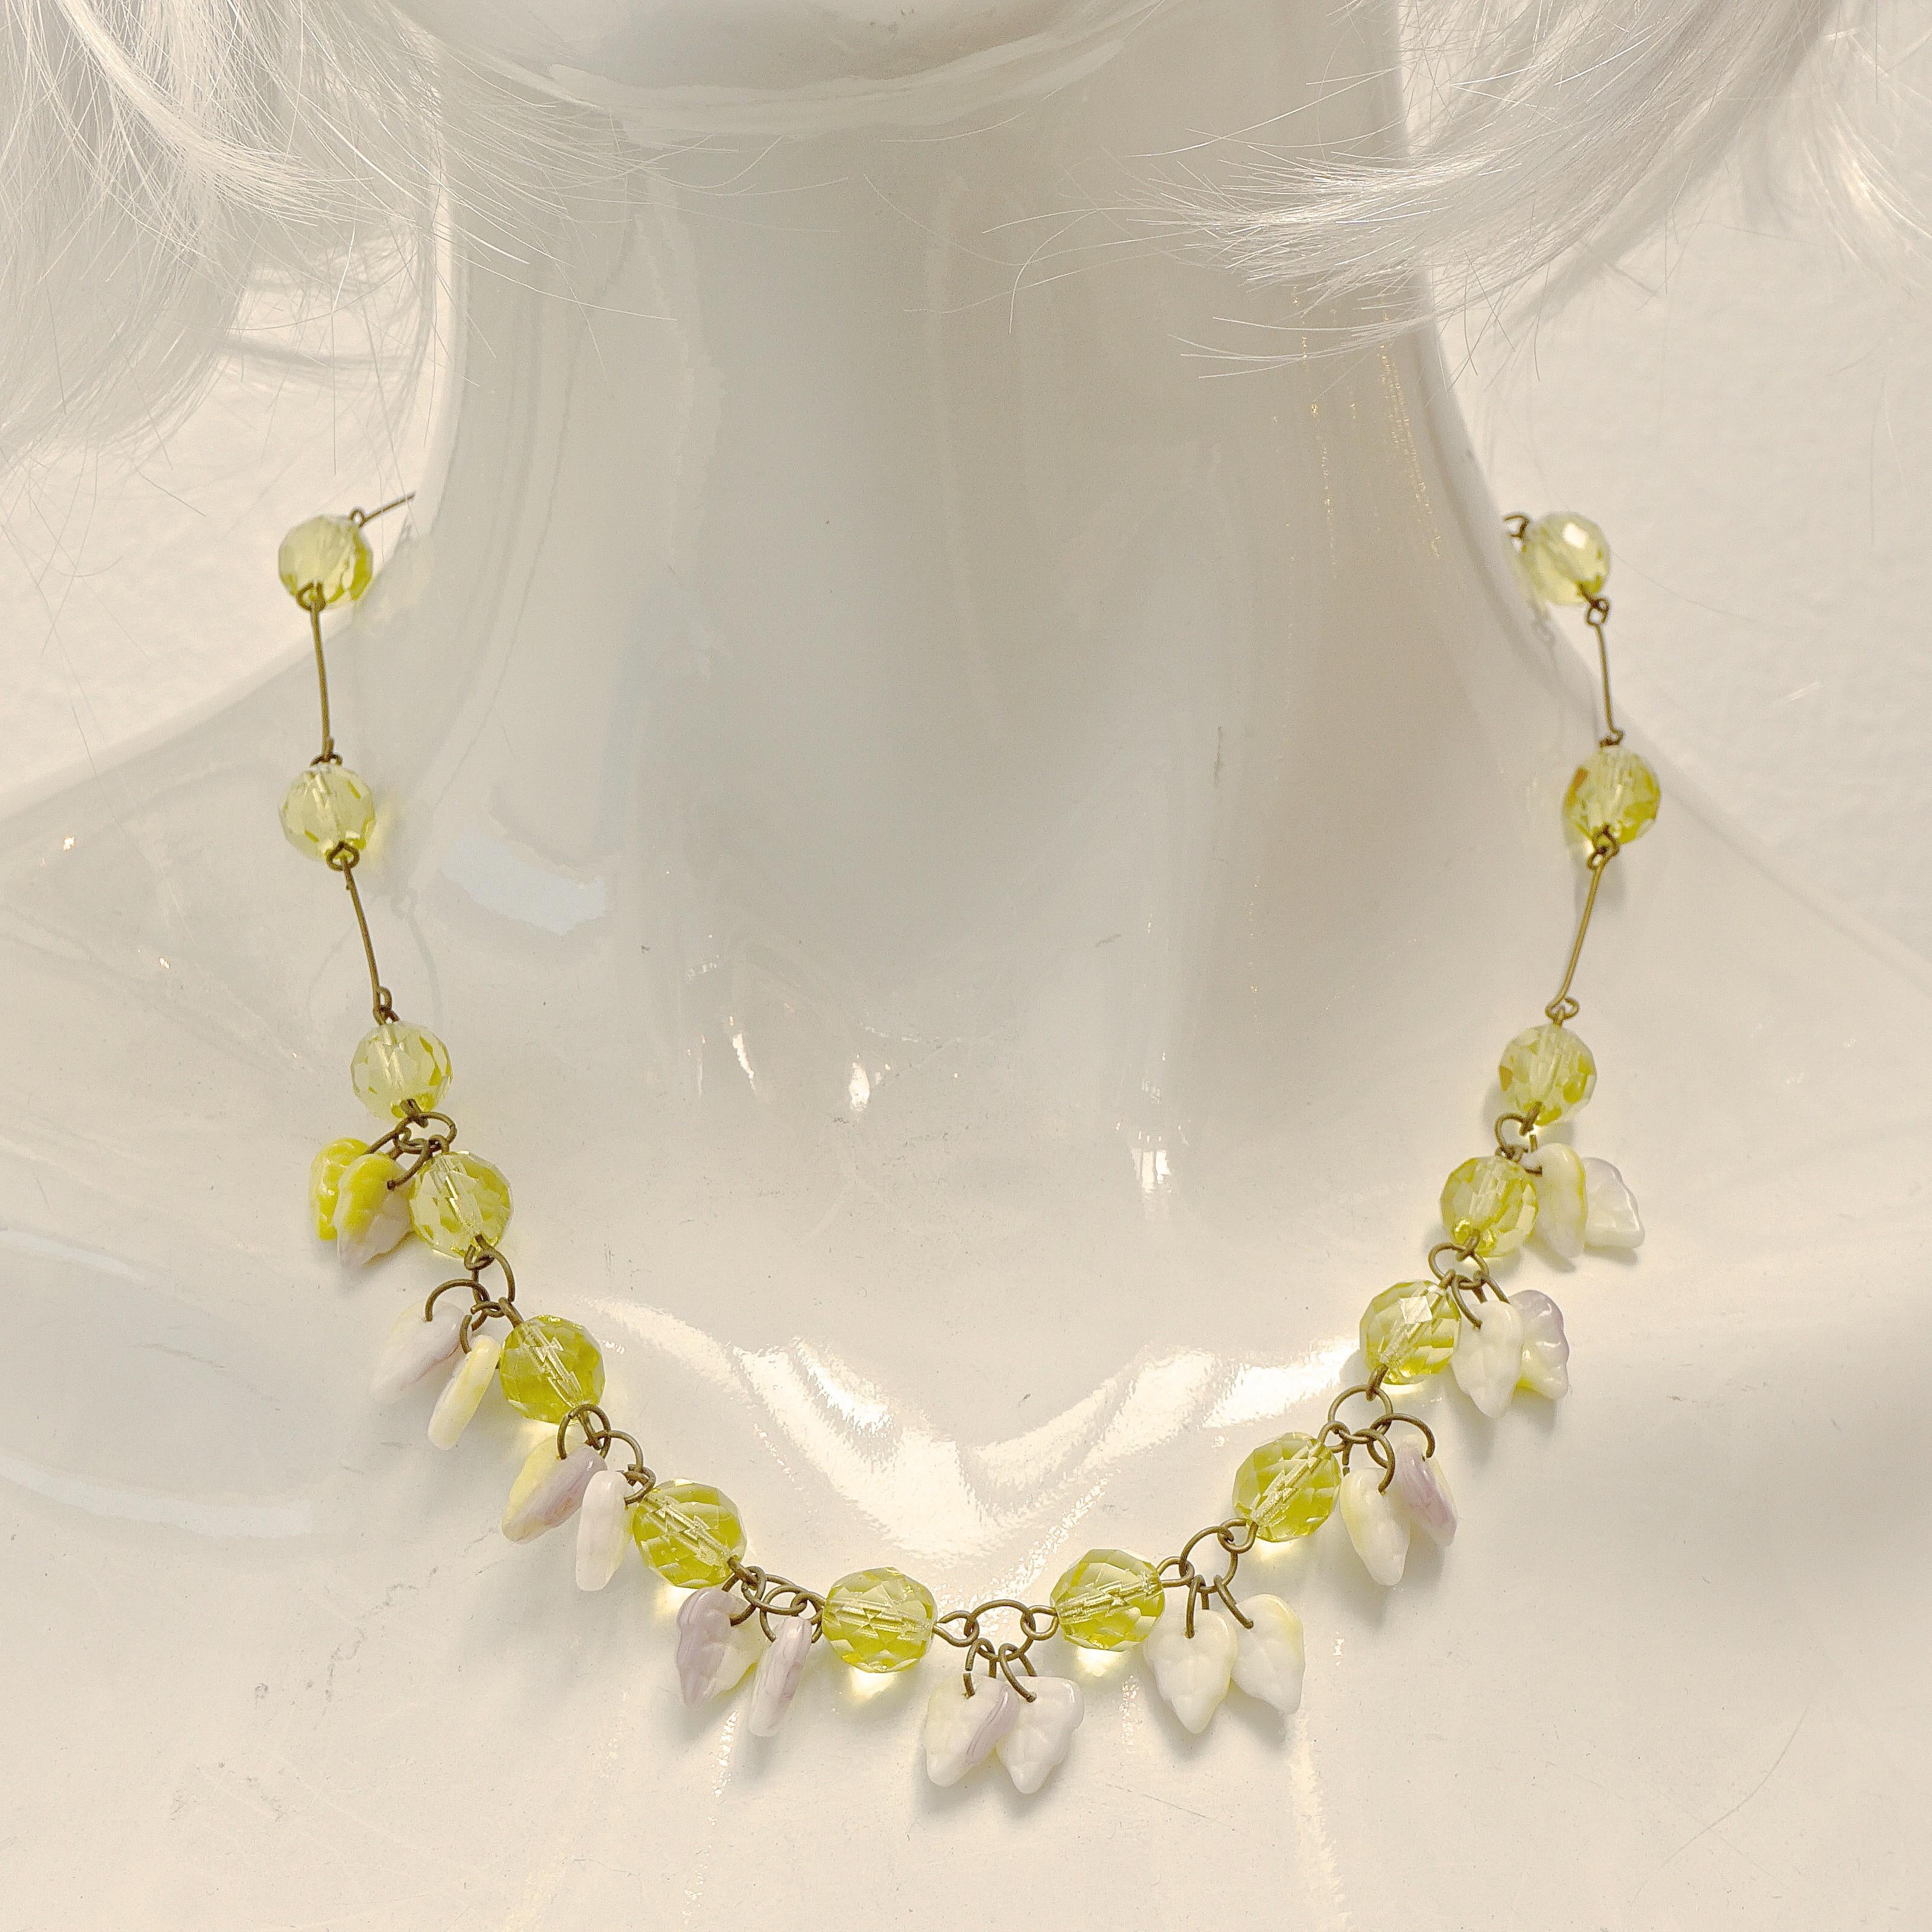 Art Deco Czech gold plated necklace, featuring faceted citrine glass and pairs of white glass leaf drops with citrine and lilac decoration. Measuring length 50cm / 19.6 inches, and the citrine glass beads are 9mm / .35 inch. Most of the gold plating